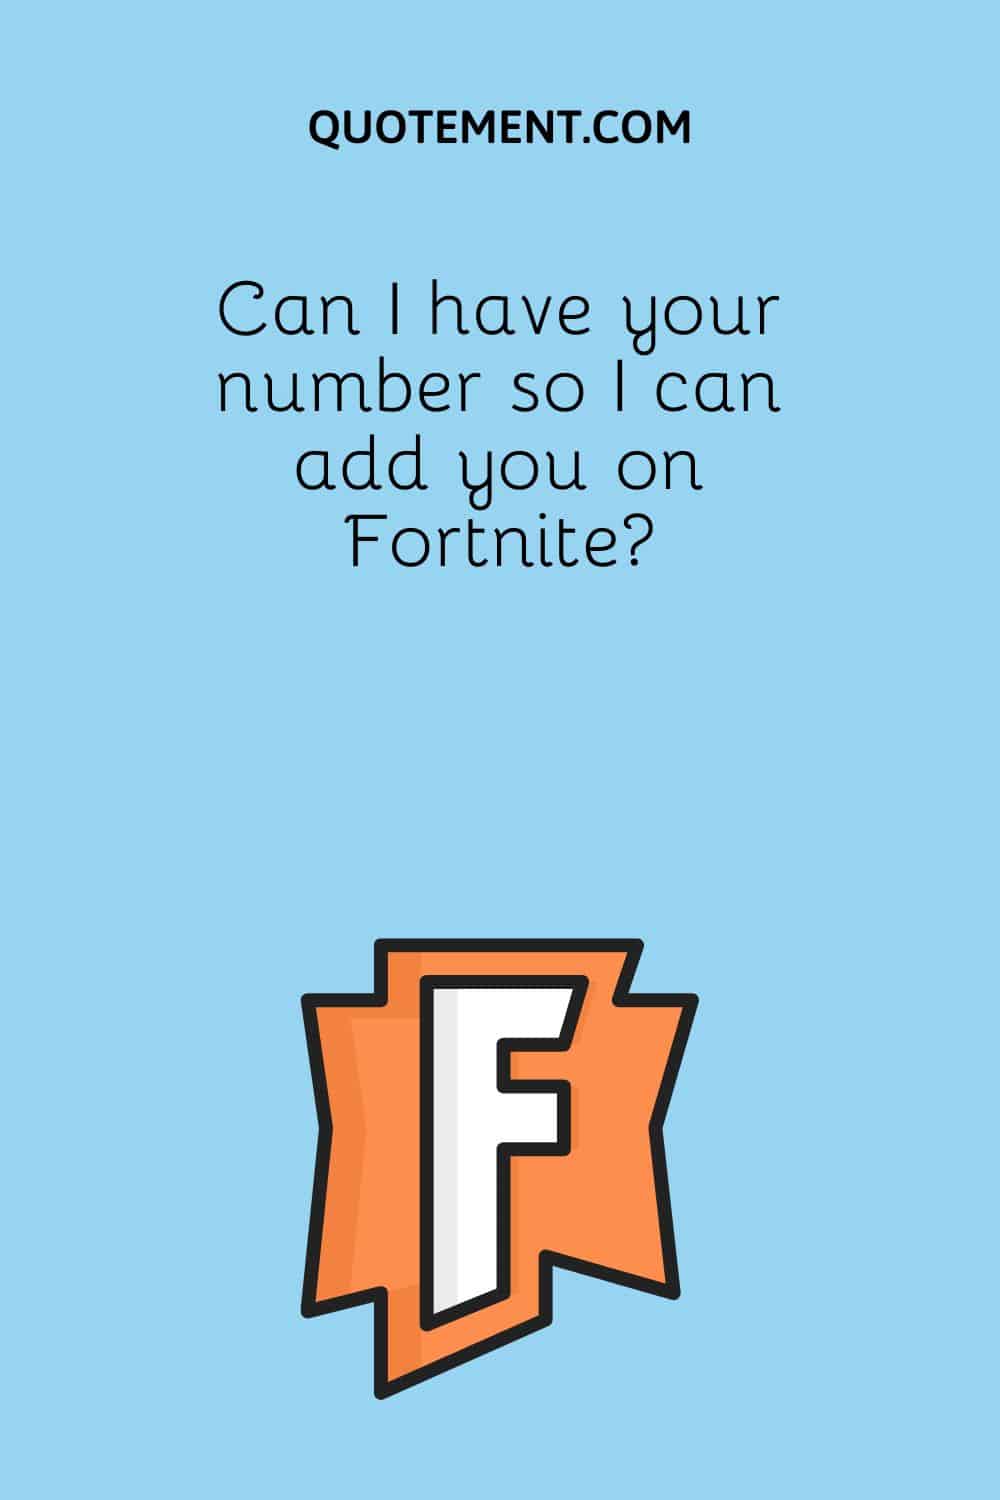 Can I have your number so I can add you on Fortnite